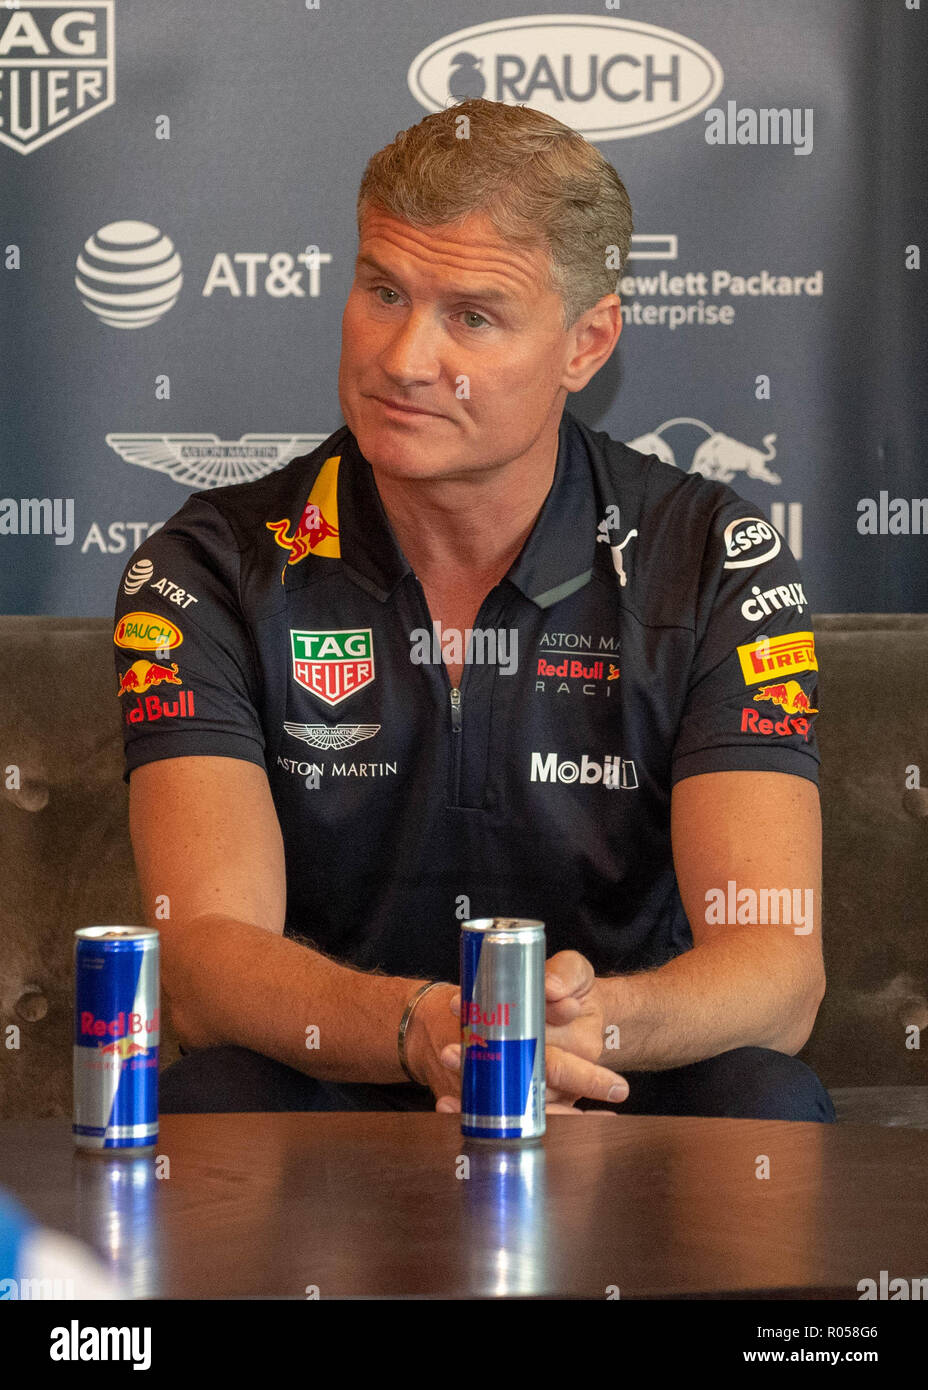 Belfast, Northern Ireland, U.K. 02 November 2018. Press Conference with Red Bull F1 Showrun Driver David Coulthard ahead of the Red Bull Racing Team's Showrun in Belfast City Centre on Saturday. Credit: John Rymer/Alamy Live News Stock Photo